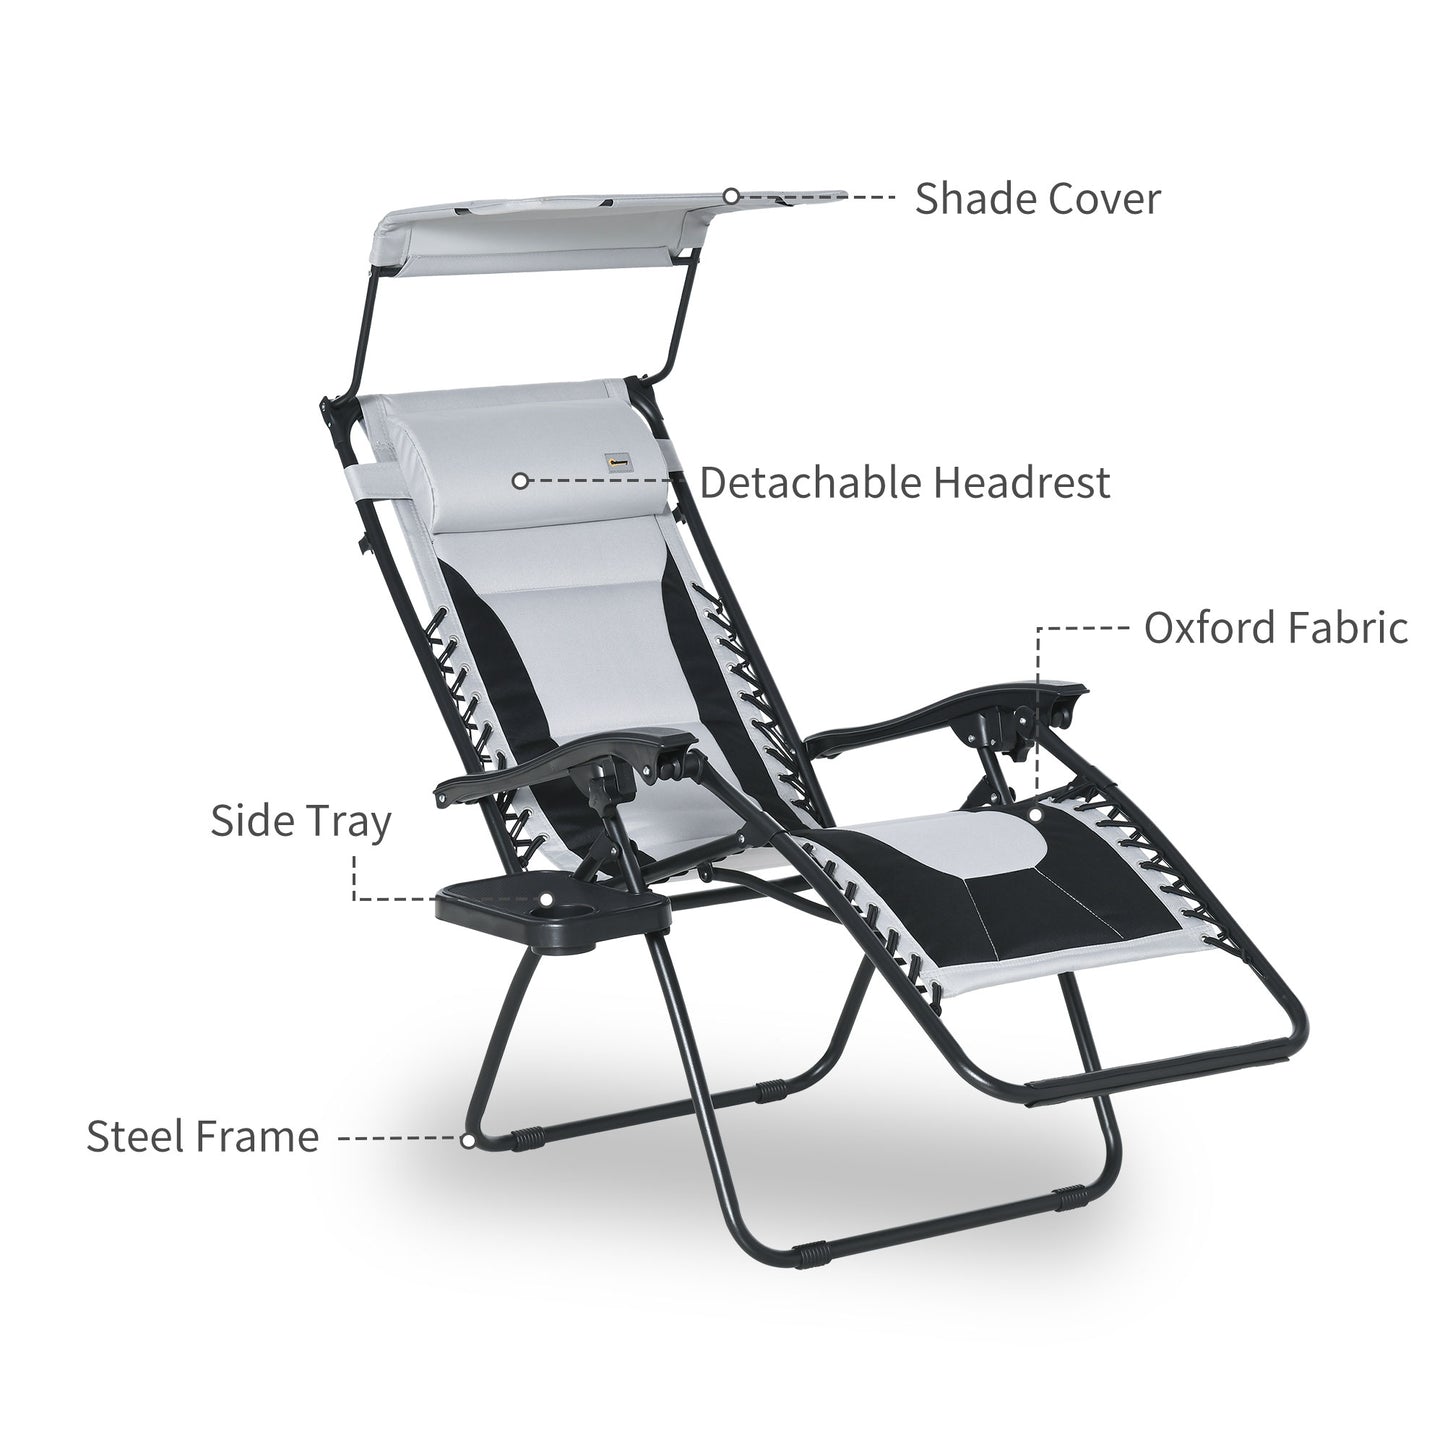 Outsunny Zero Gravity Garden Loungers, Folding Reclining Patio Chair with Shade Cover, Cup Holder and Headrest for Poolside, Camping, Grey | Aosom UK